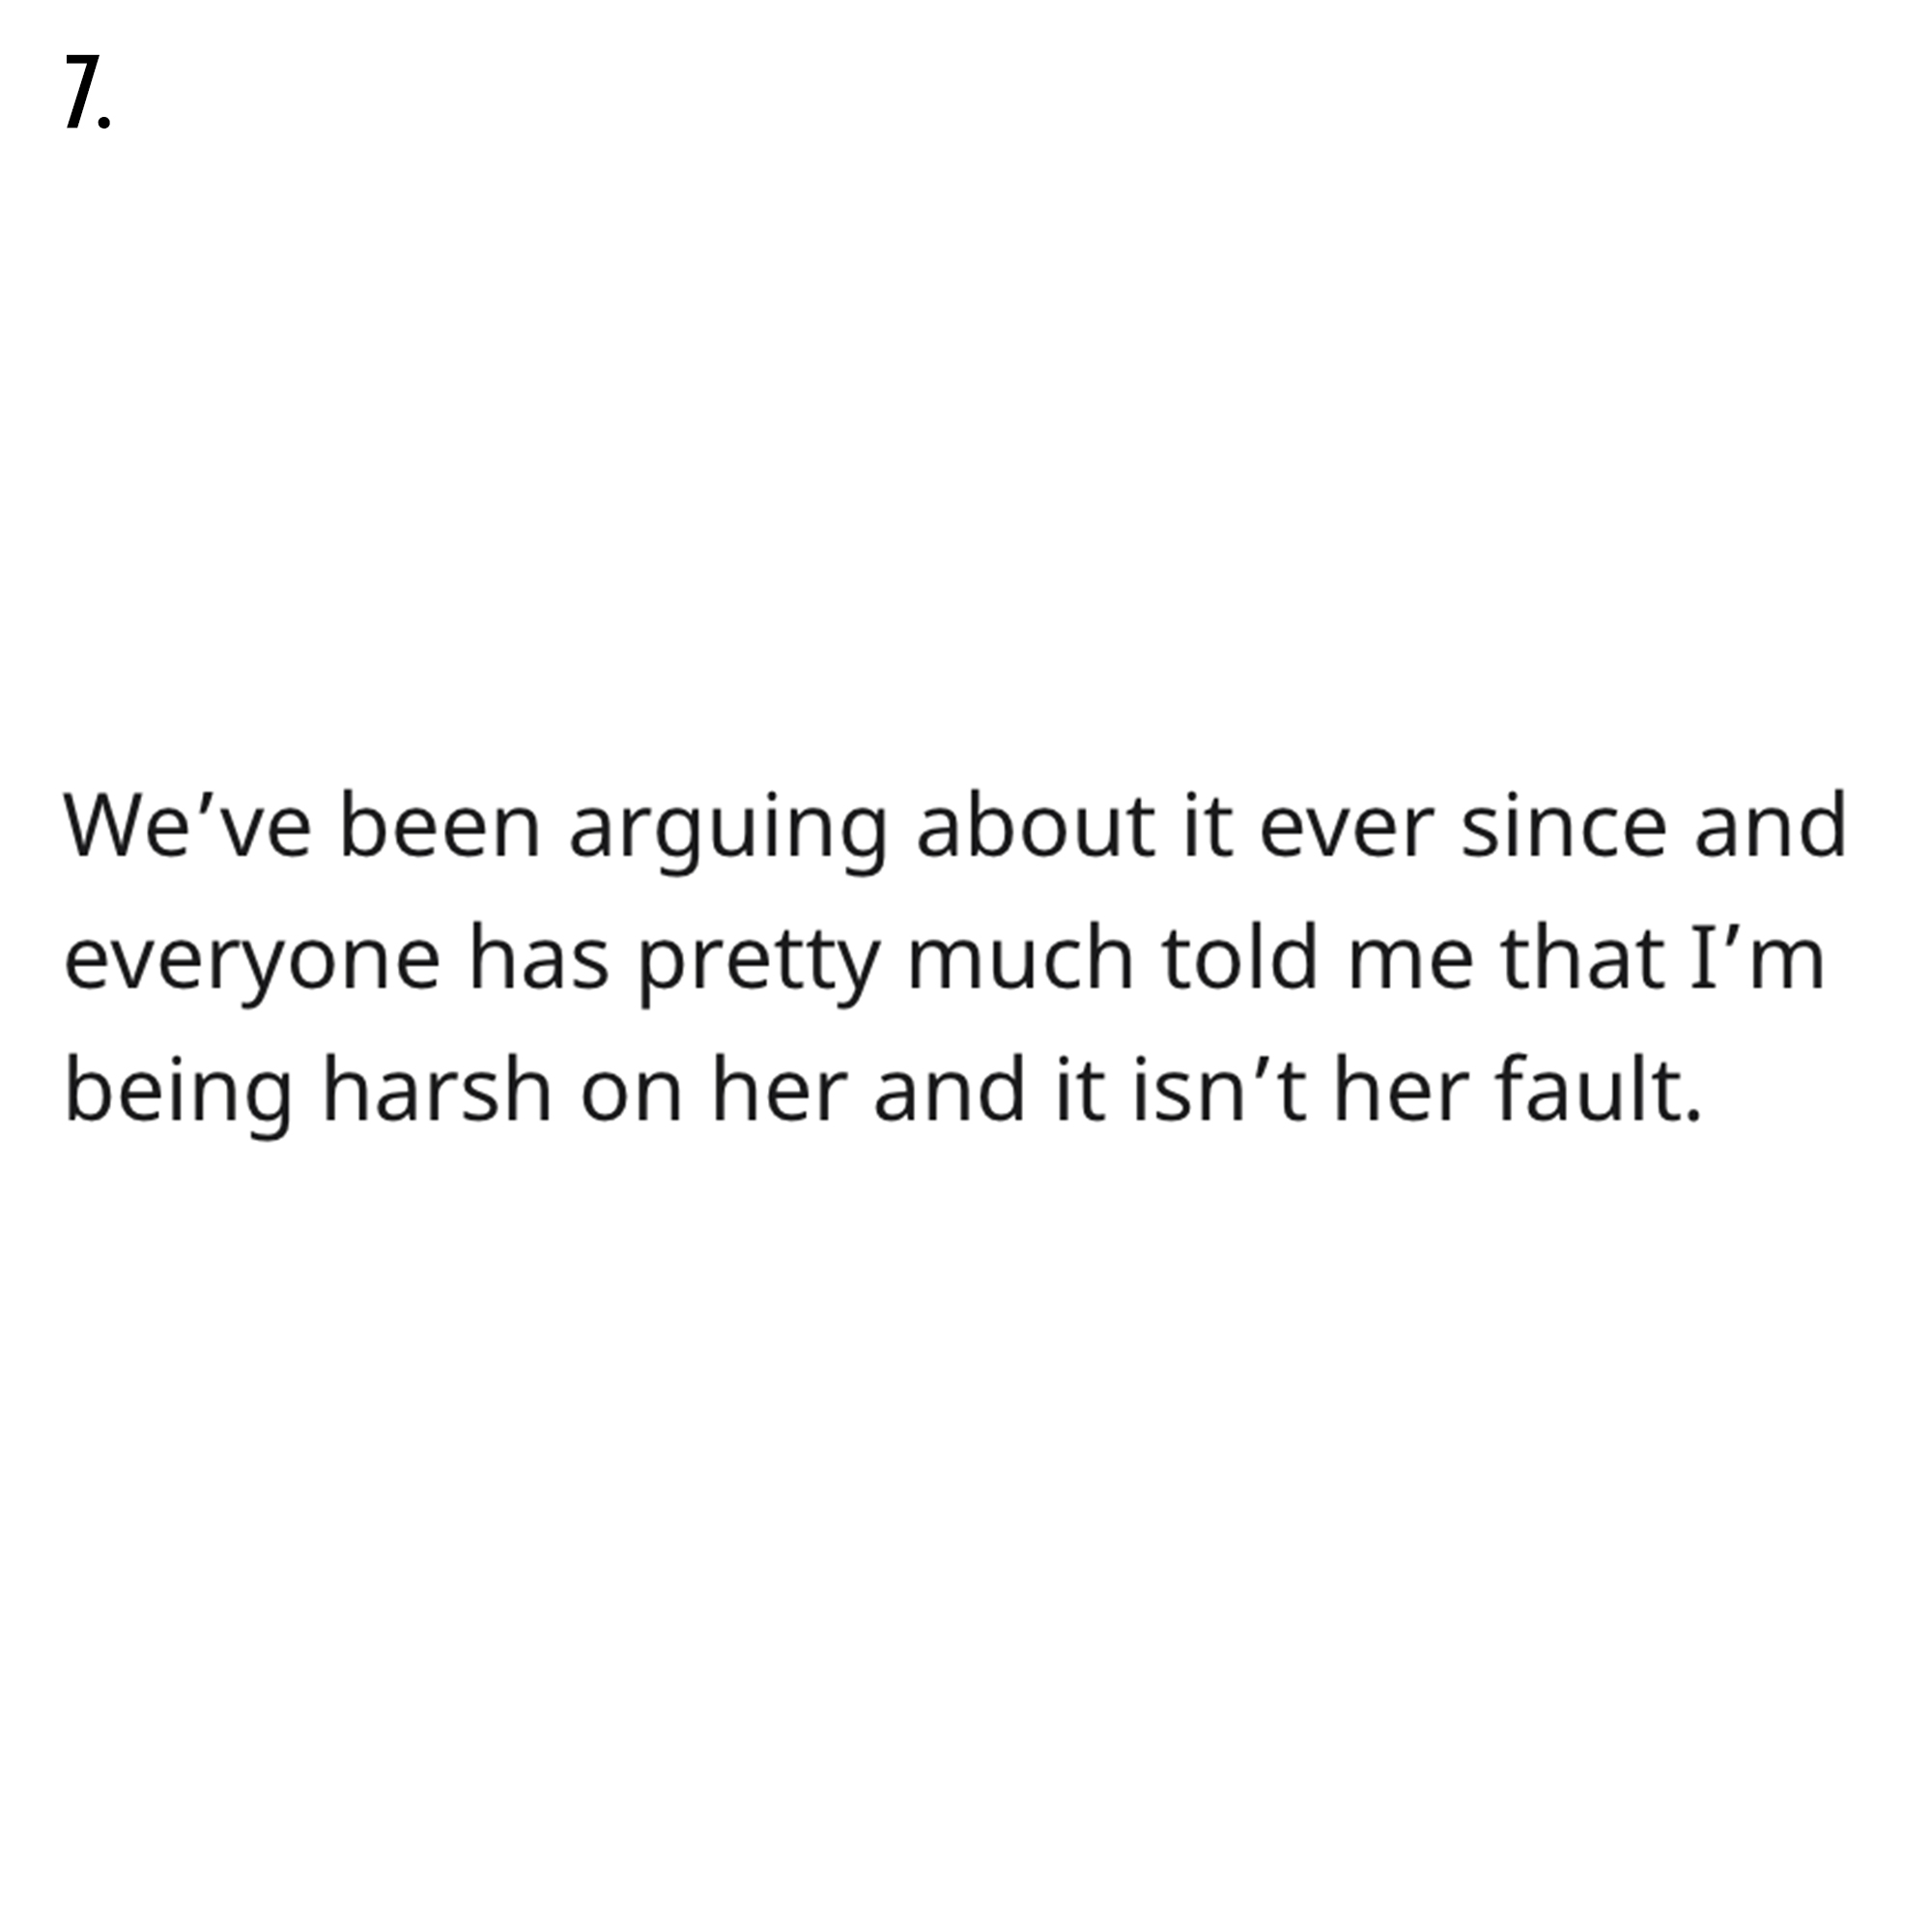 AITA Reddit Story - 7. We've been arguing about it ever since and everyone has pretty much told me that I'm being harsh on her and it isn't her fault.